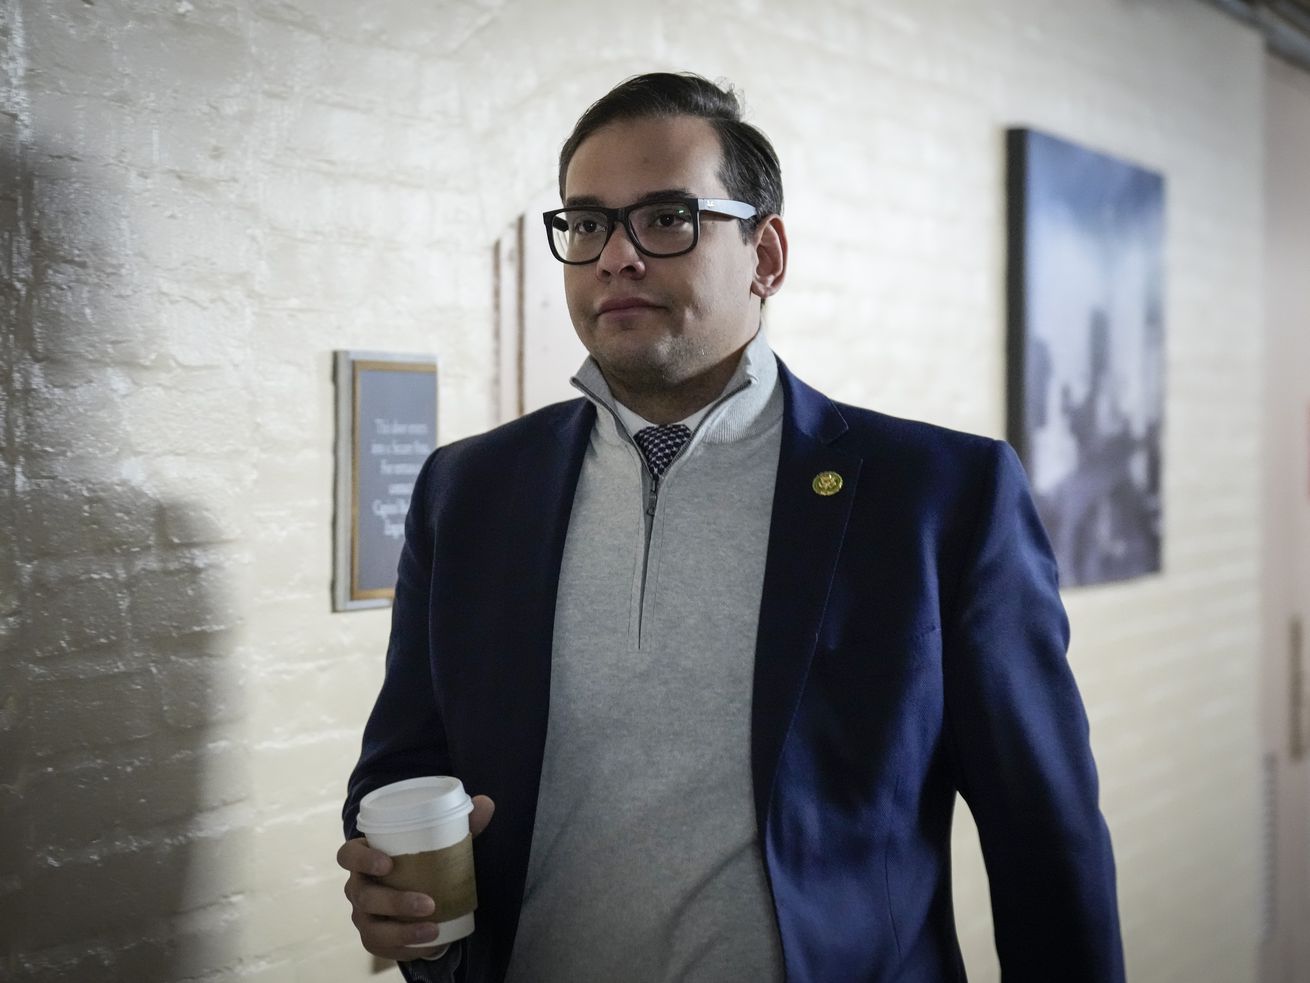 Rep. George Santos walks through a Capitol hallway with a to-go coffee cup in hand.